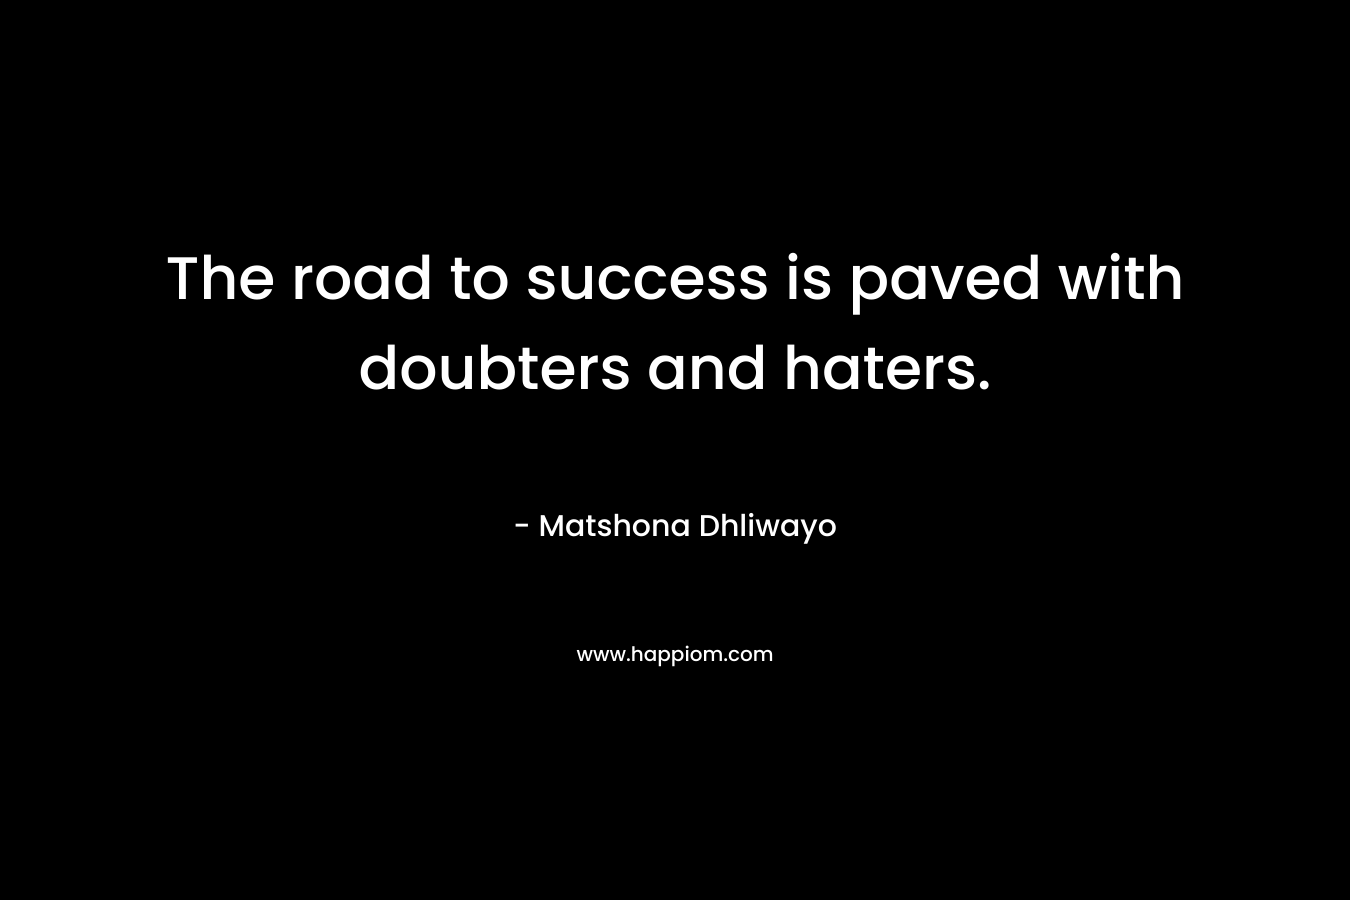 The road to success is paved with doubters and haters.